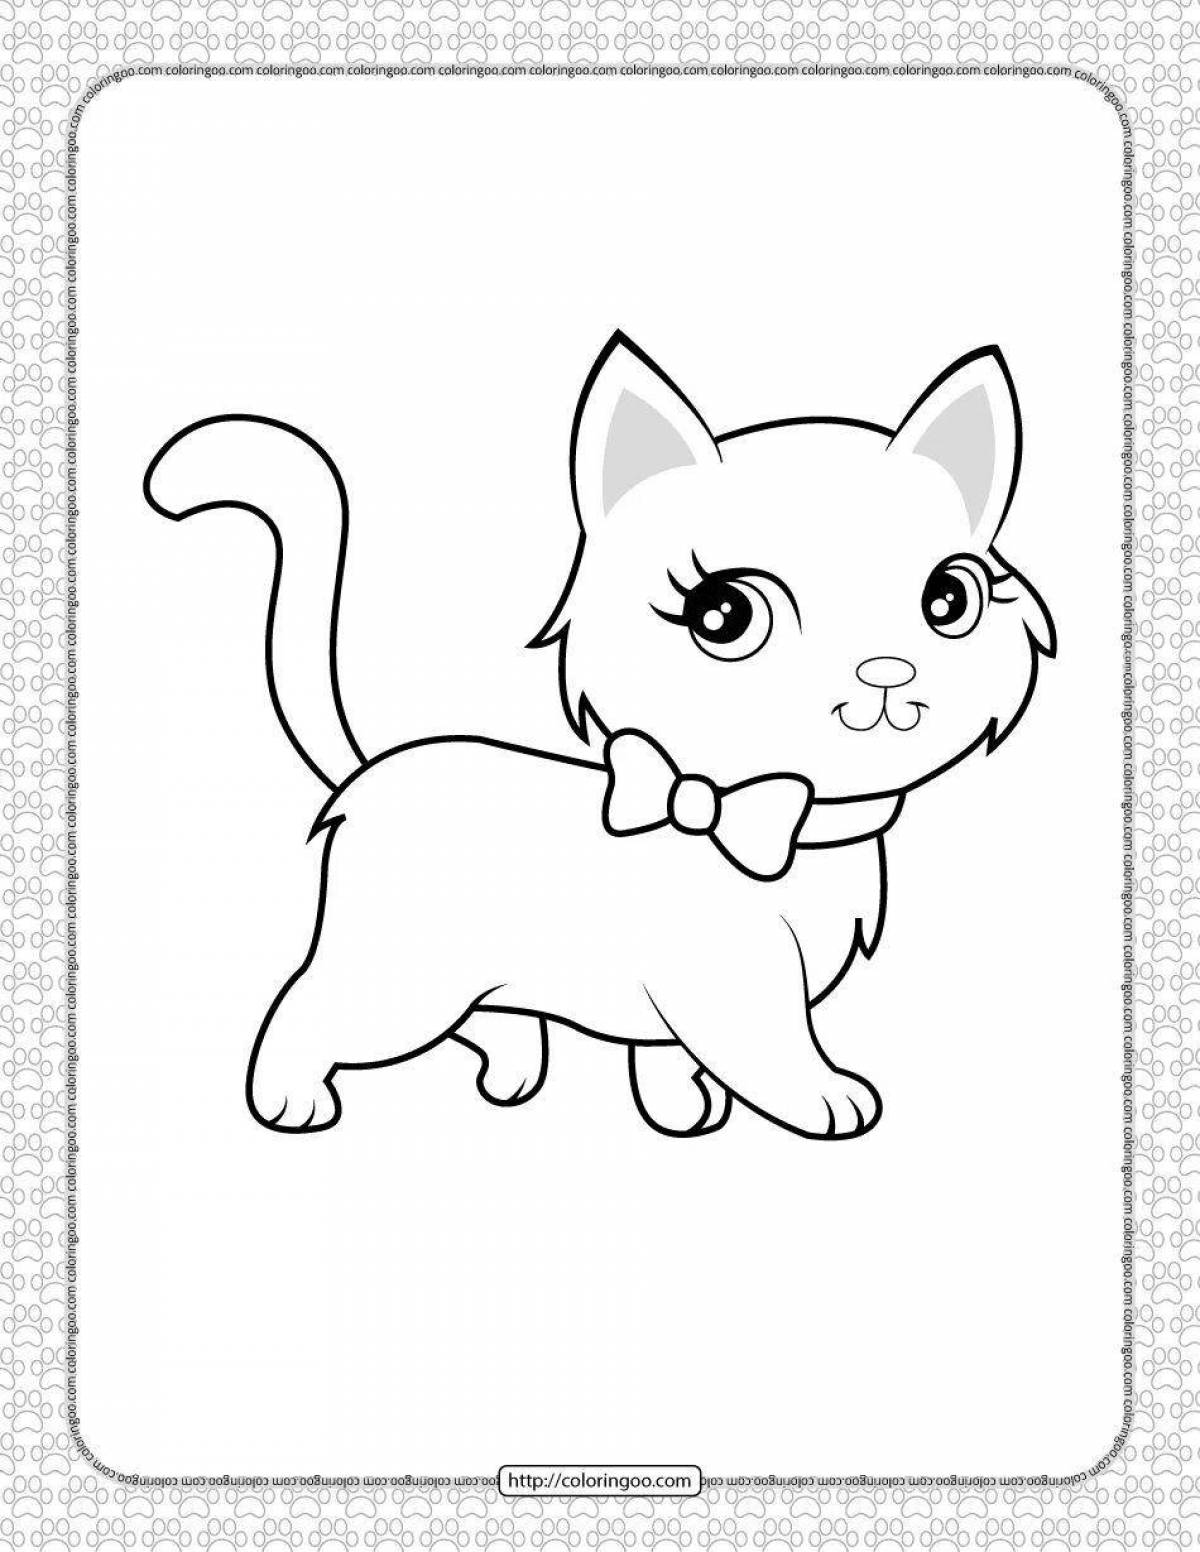 Live coloring cat for children 5-6 years old